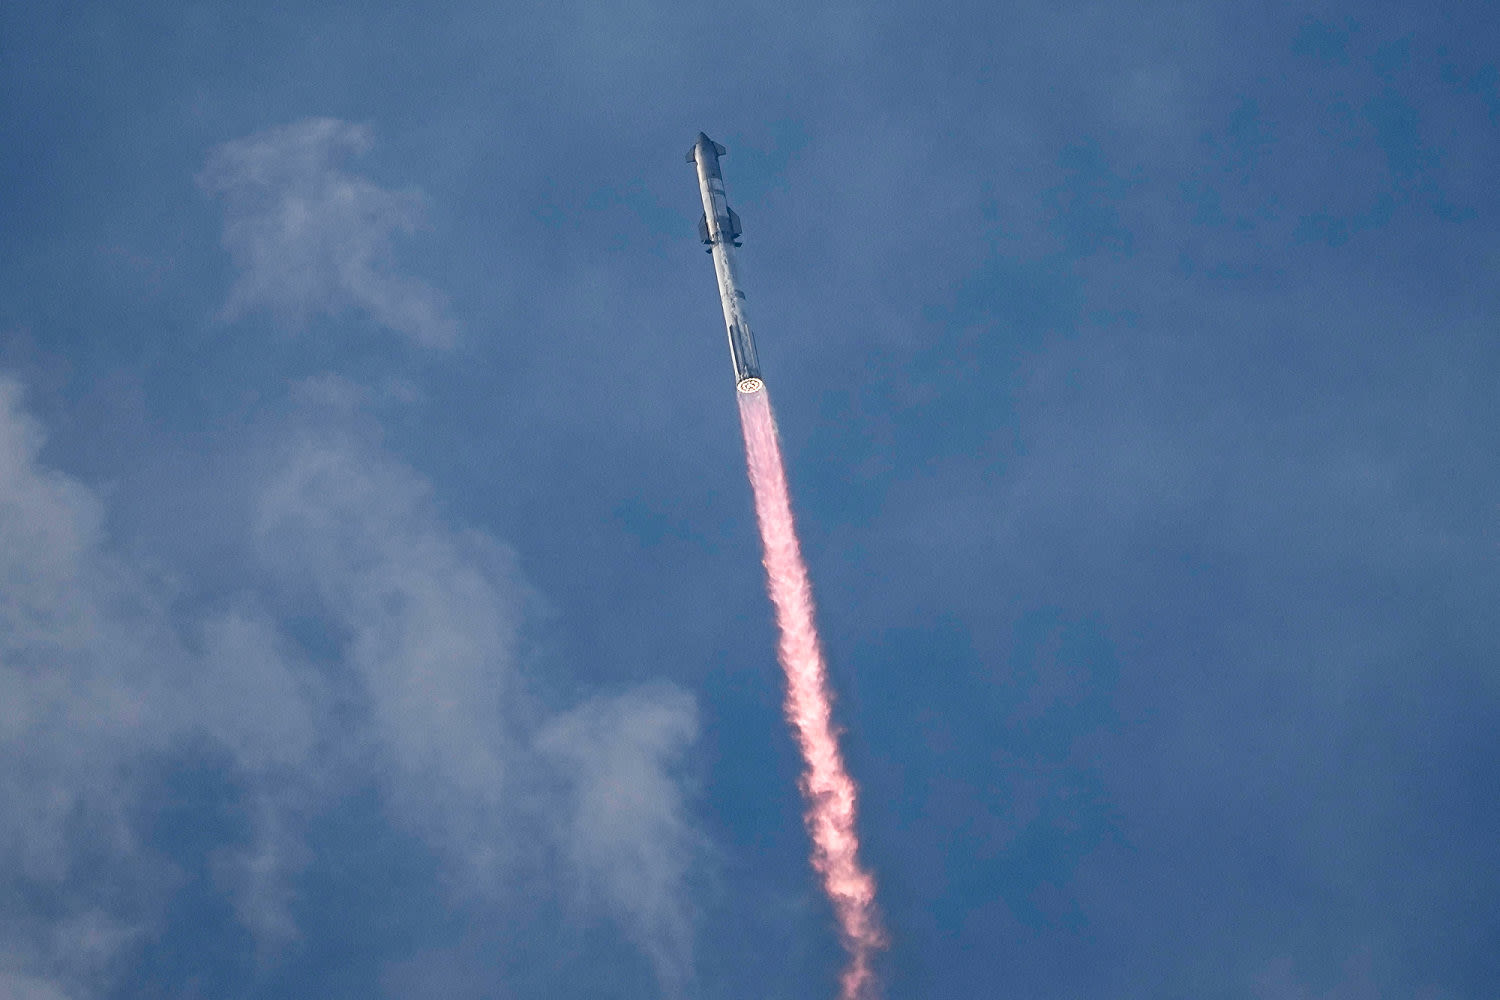 A week of rocket launches: SpaceX and Boeing each prepare for high-stakes flights to space